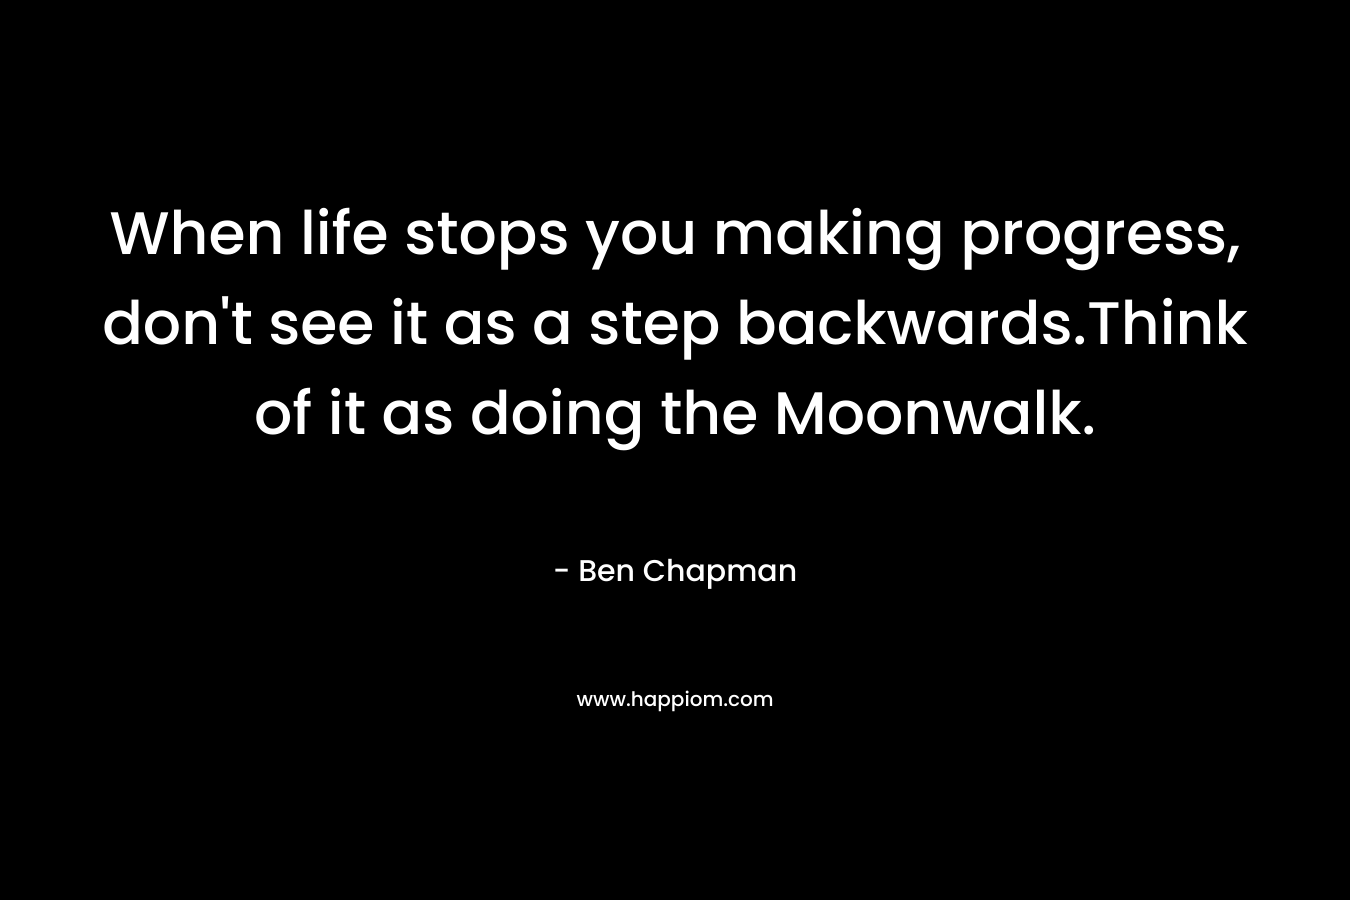 When life stops you making progress, don't see it as a step backwards.Think of it as doing the Moonwalk.